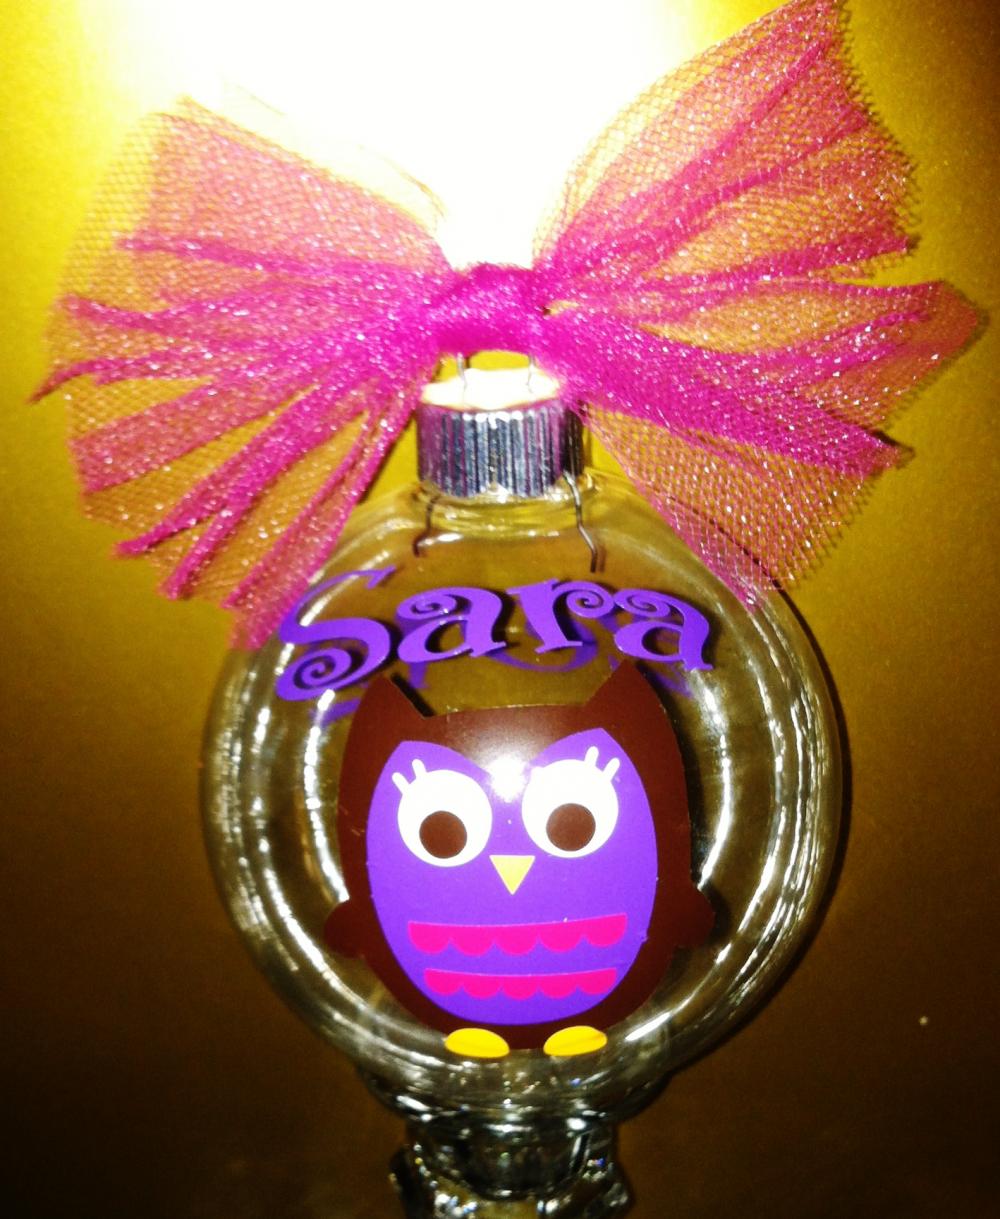 Personalized Owl Christmas Ornaments. Any Name/initial/phrase You Would Like